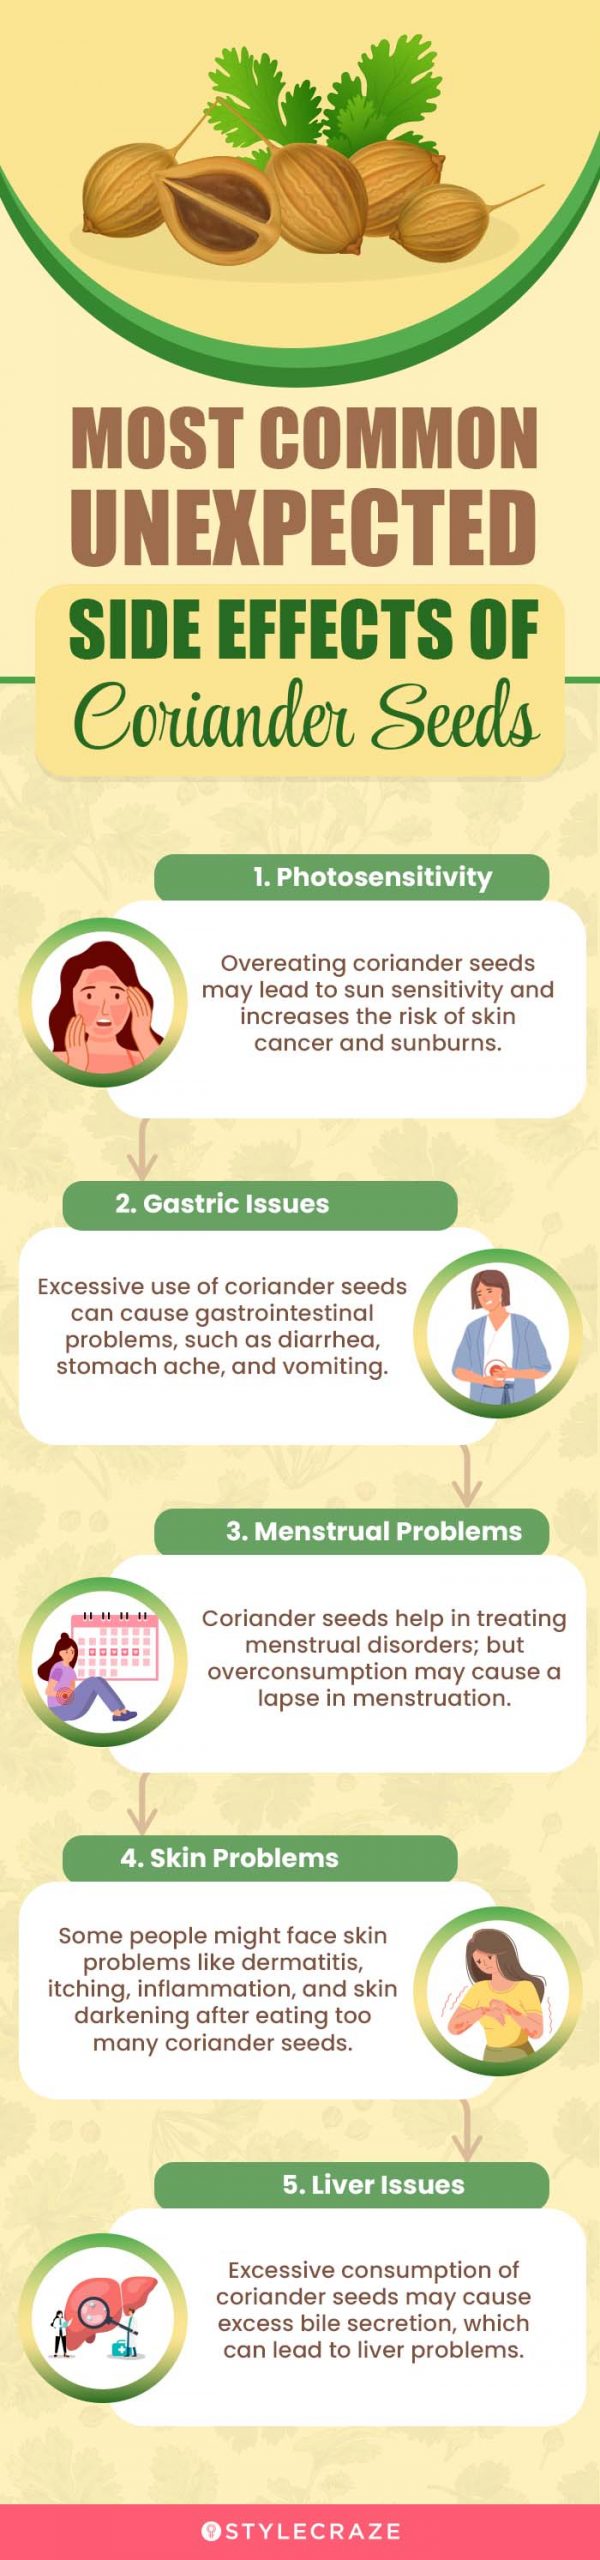 most common unexpected side effects of coriander seeds (infographic)